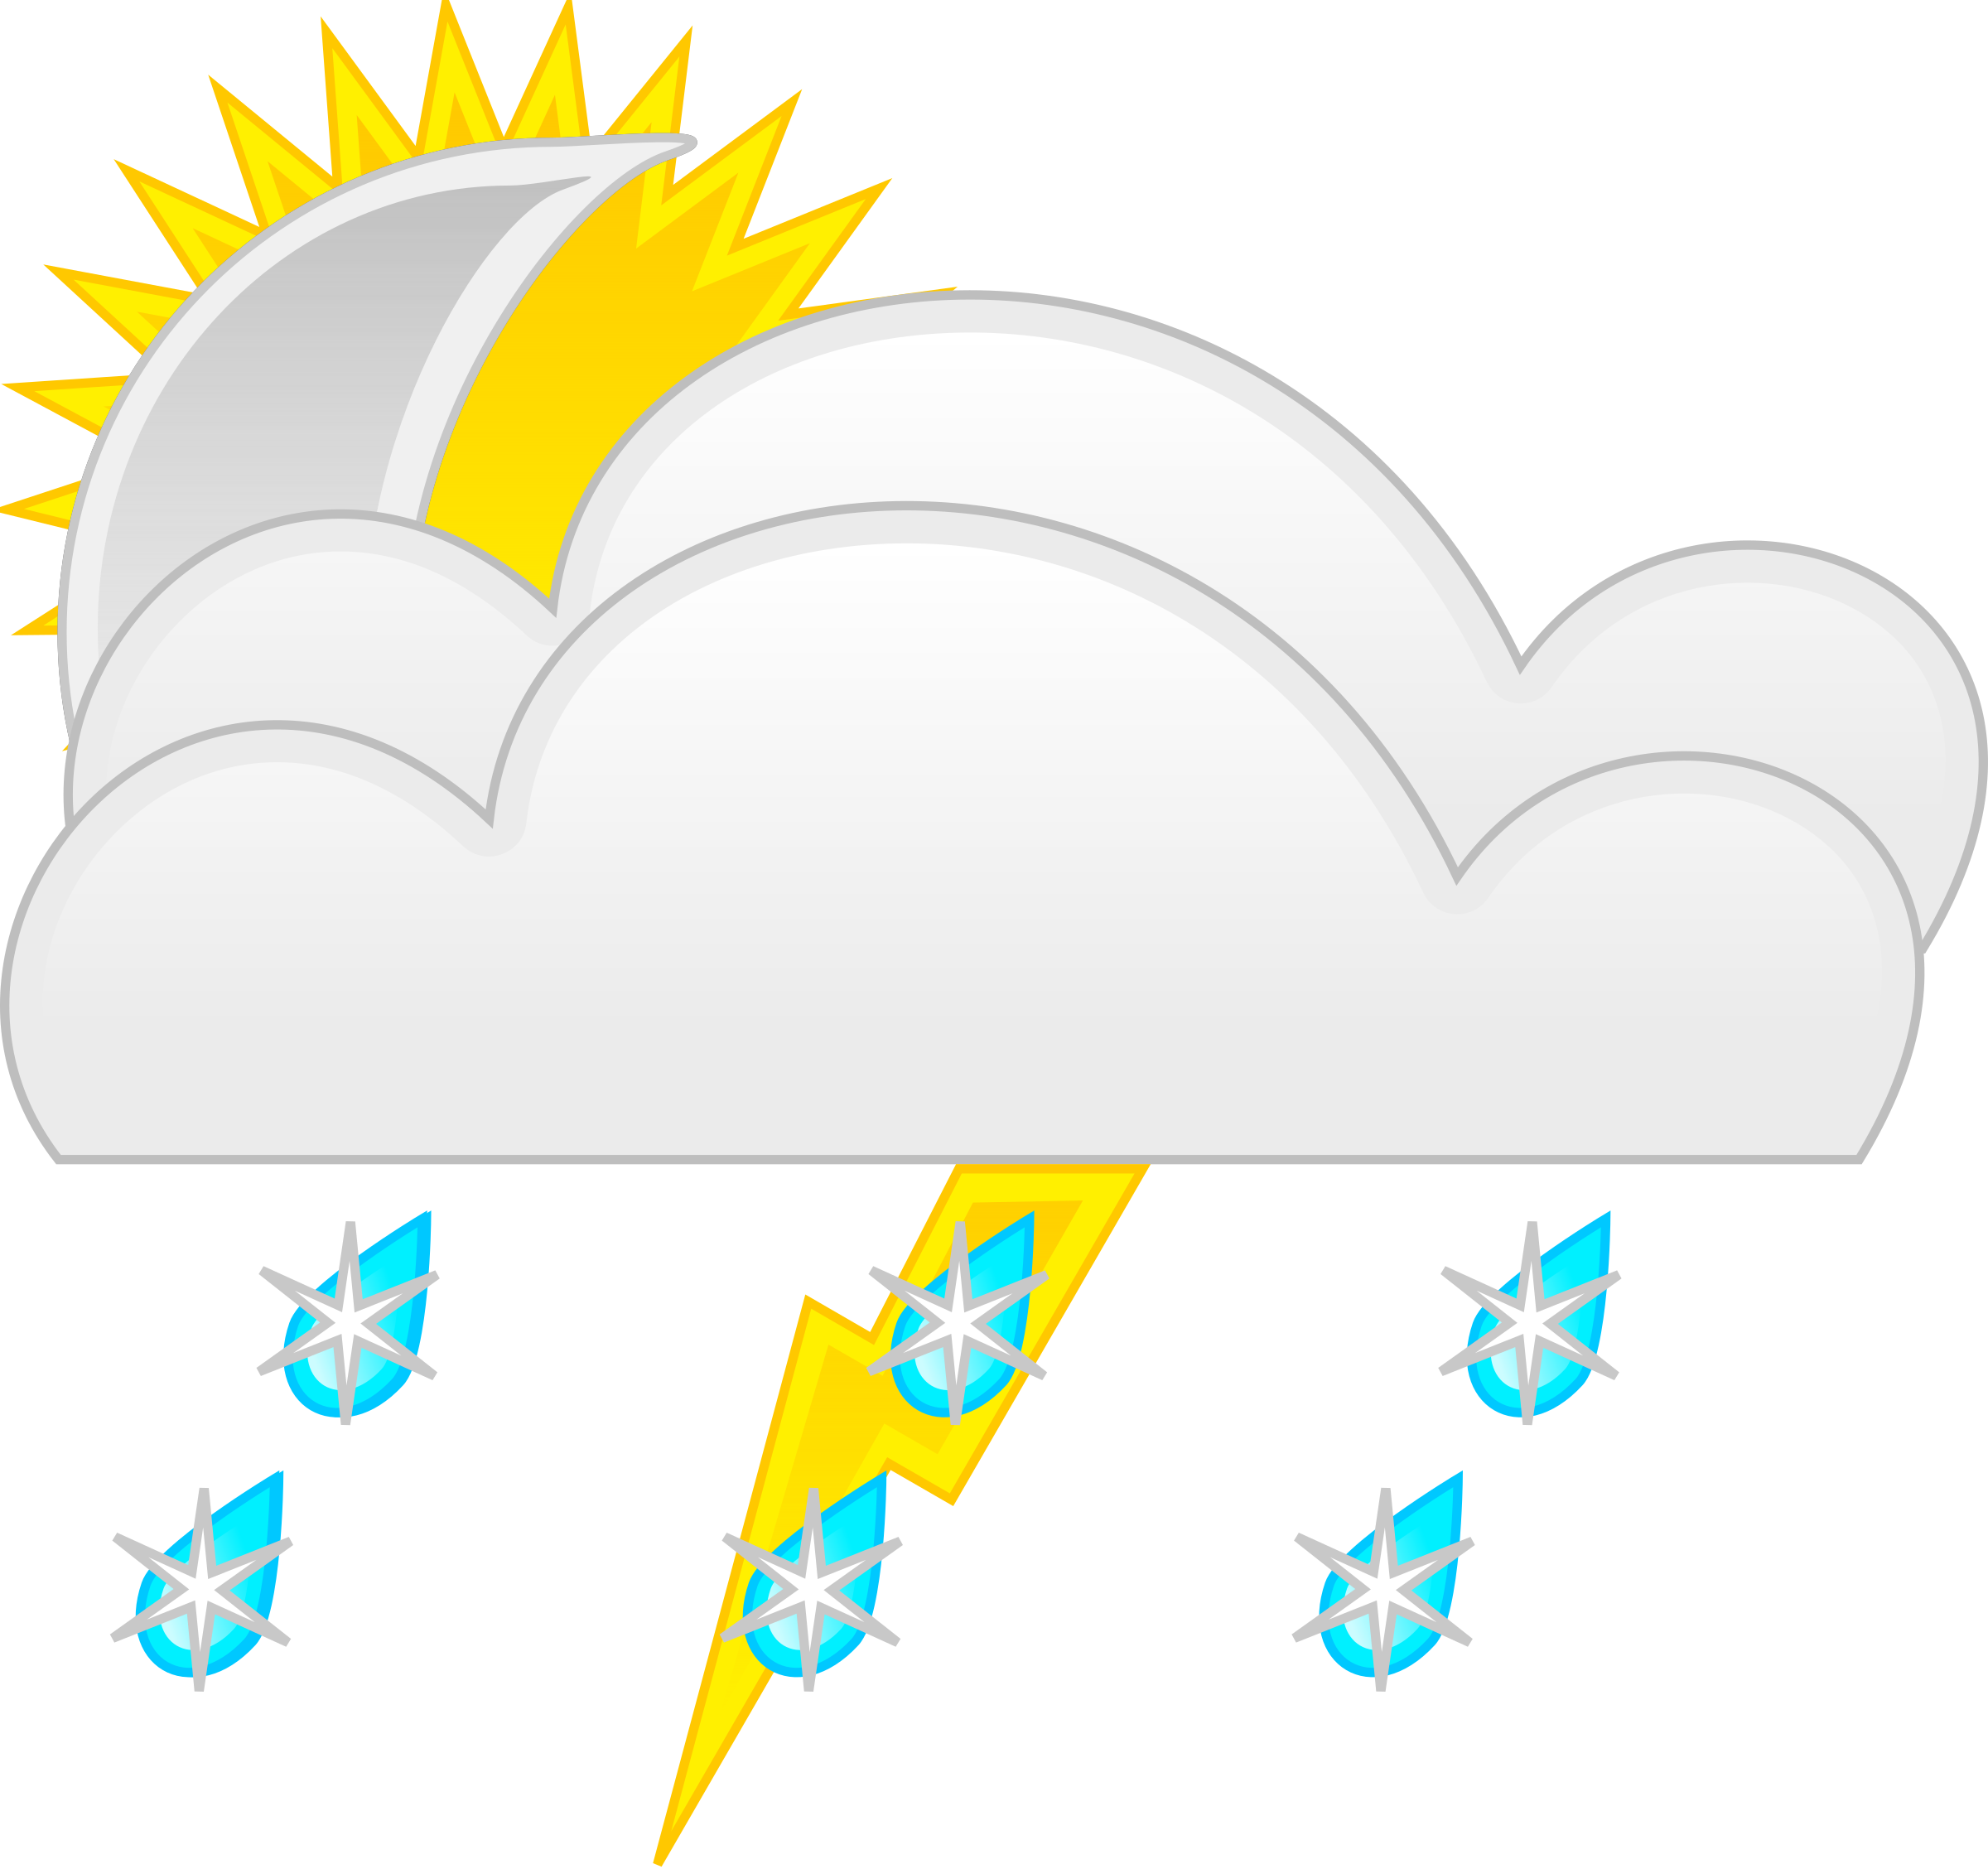 clipart free weather